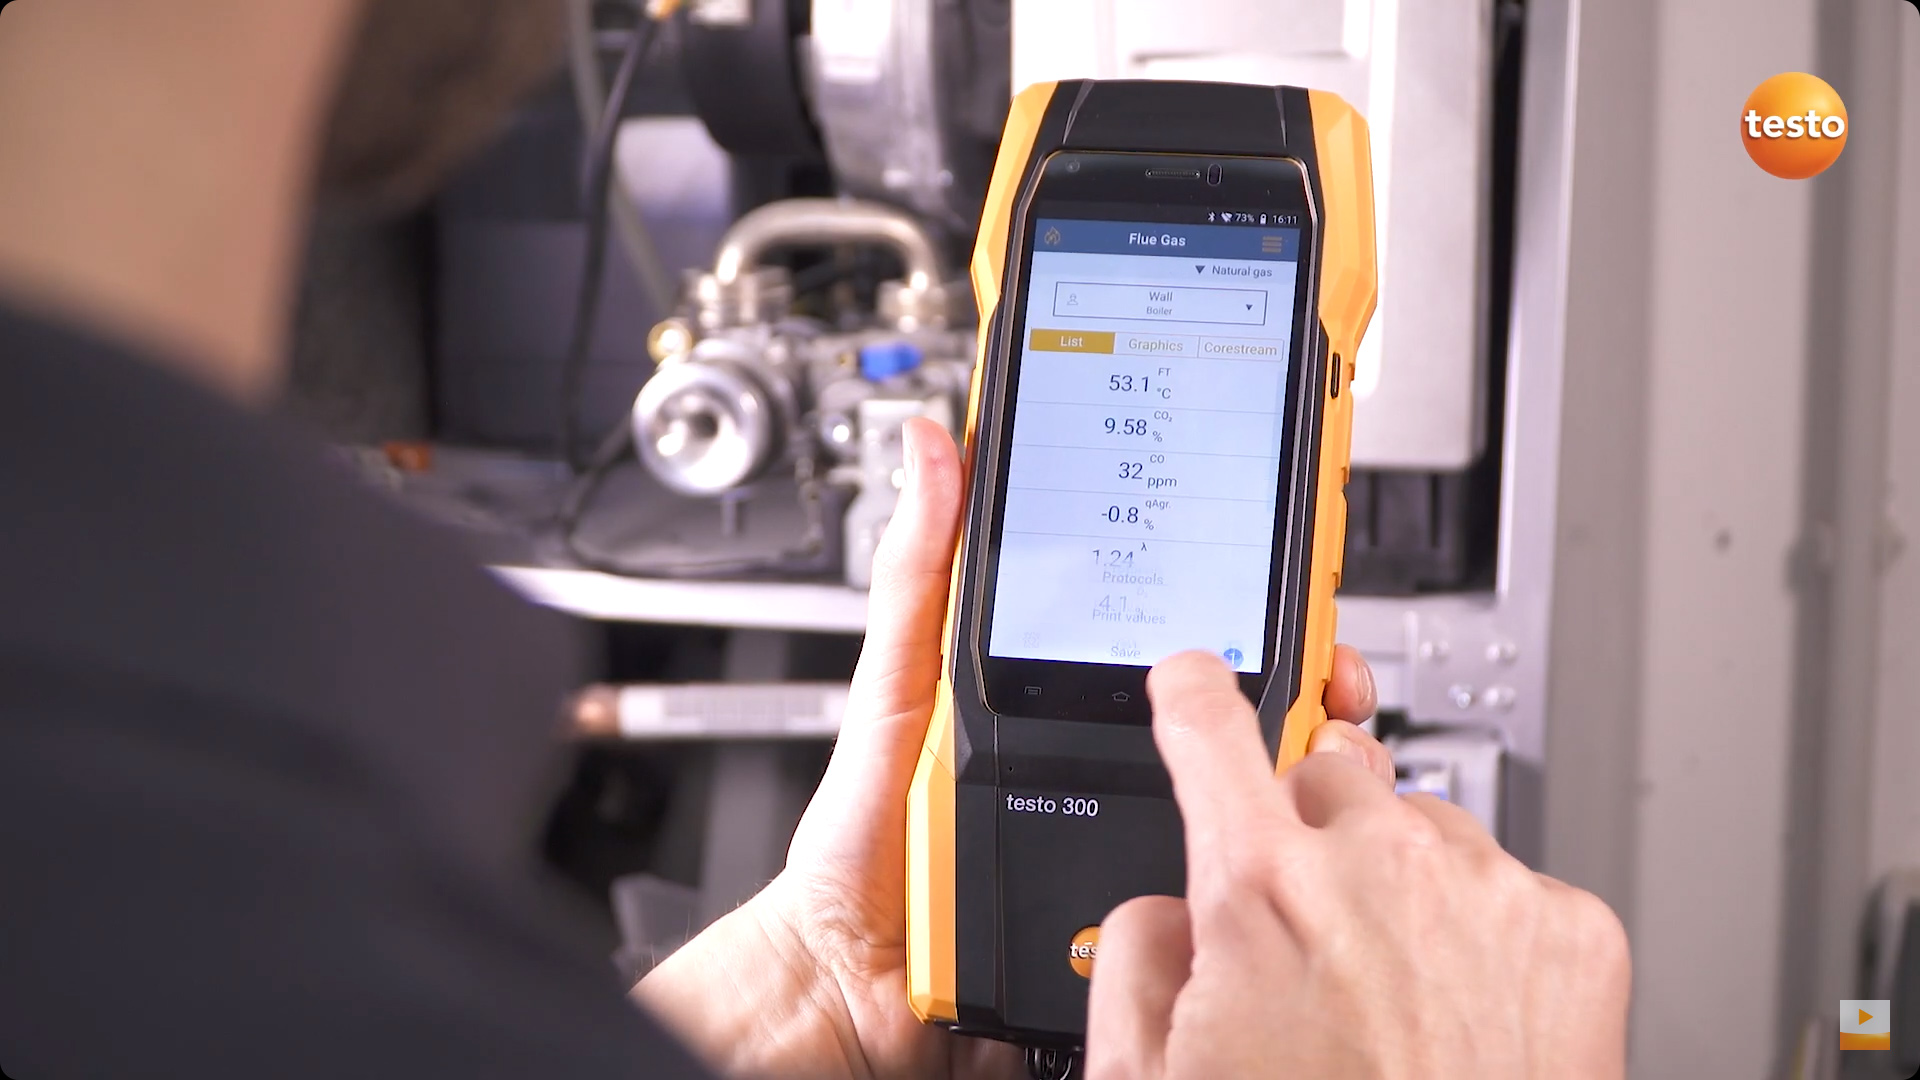 The Testo 300 Flue Gas Analyser displaying some test results on the screen.